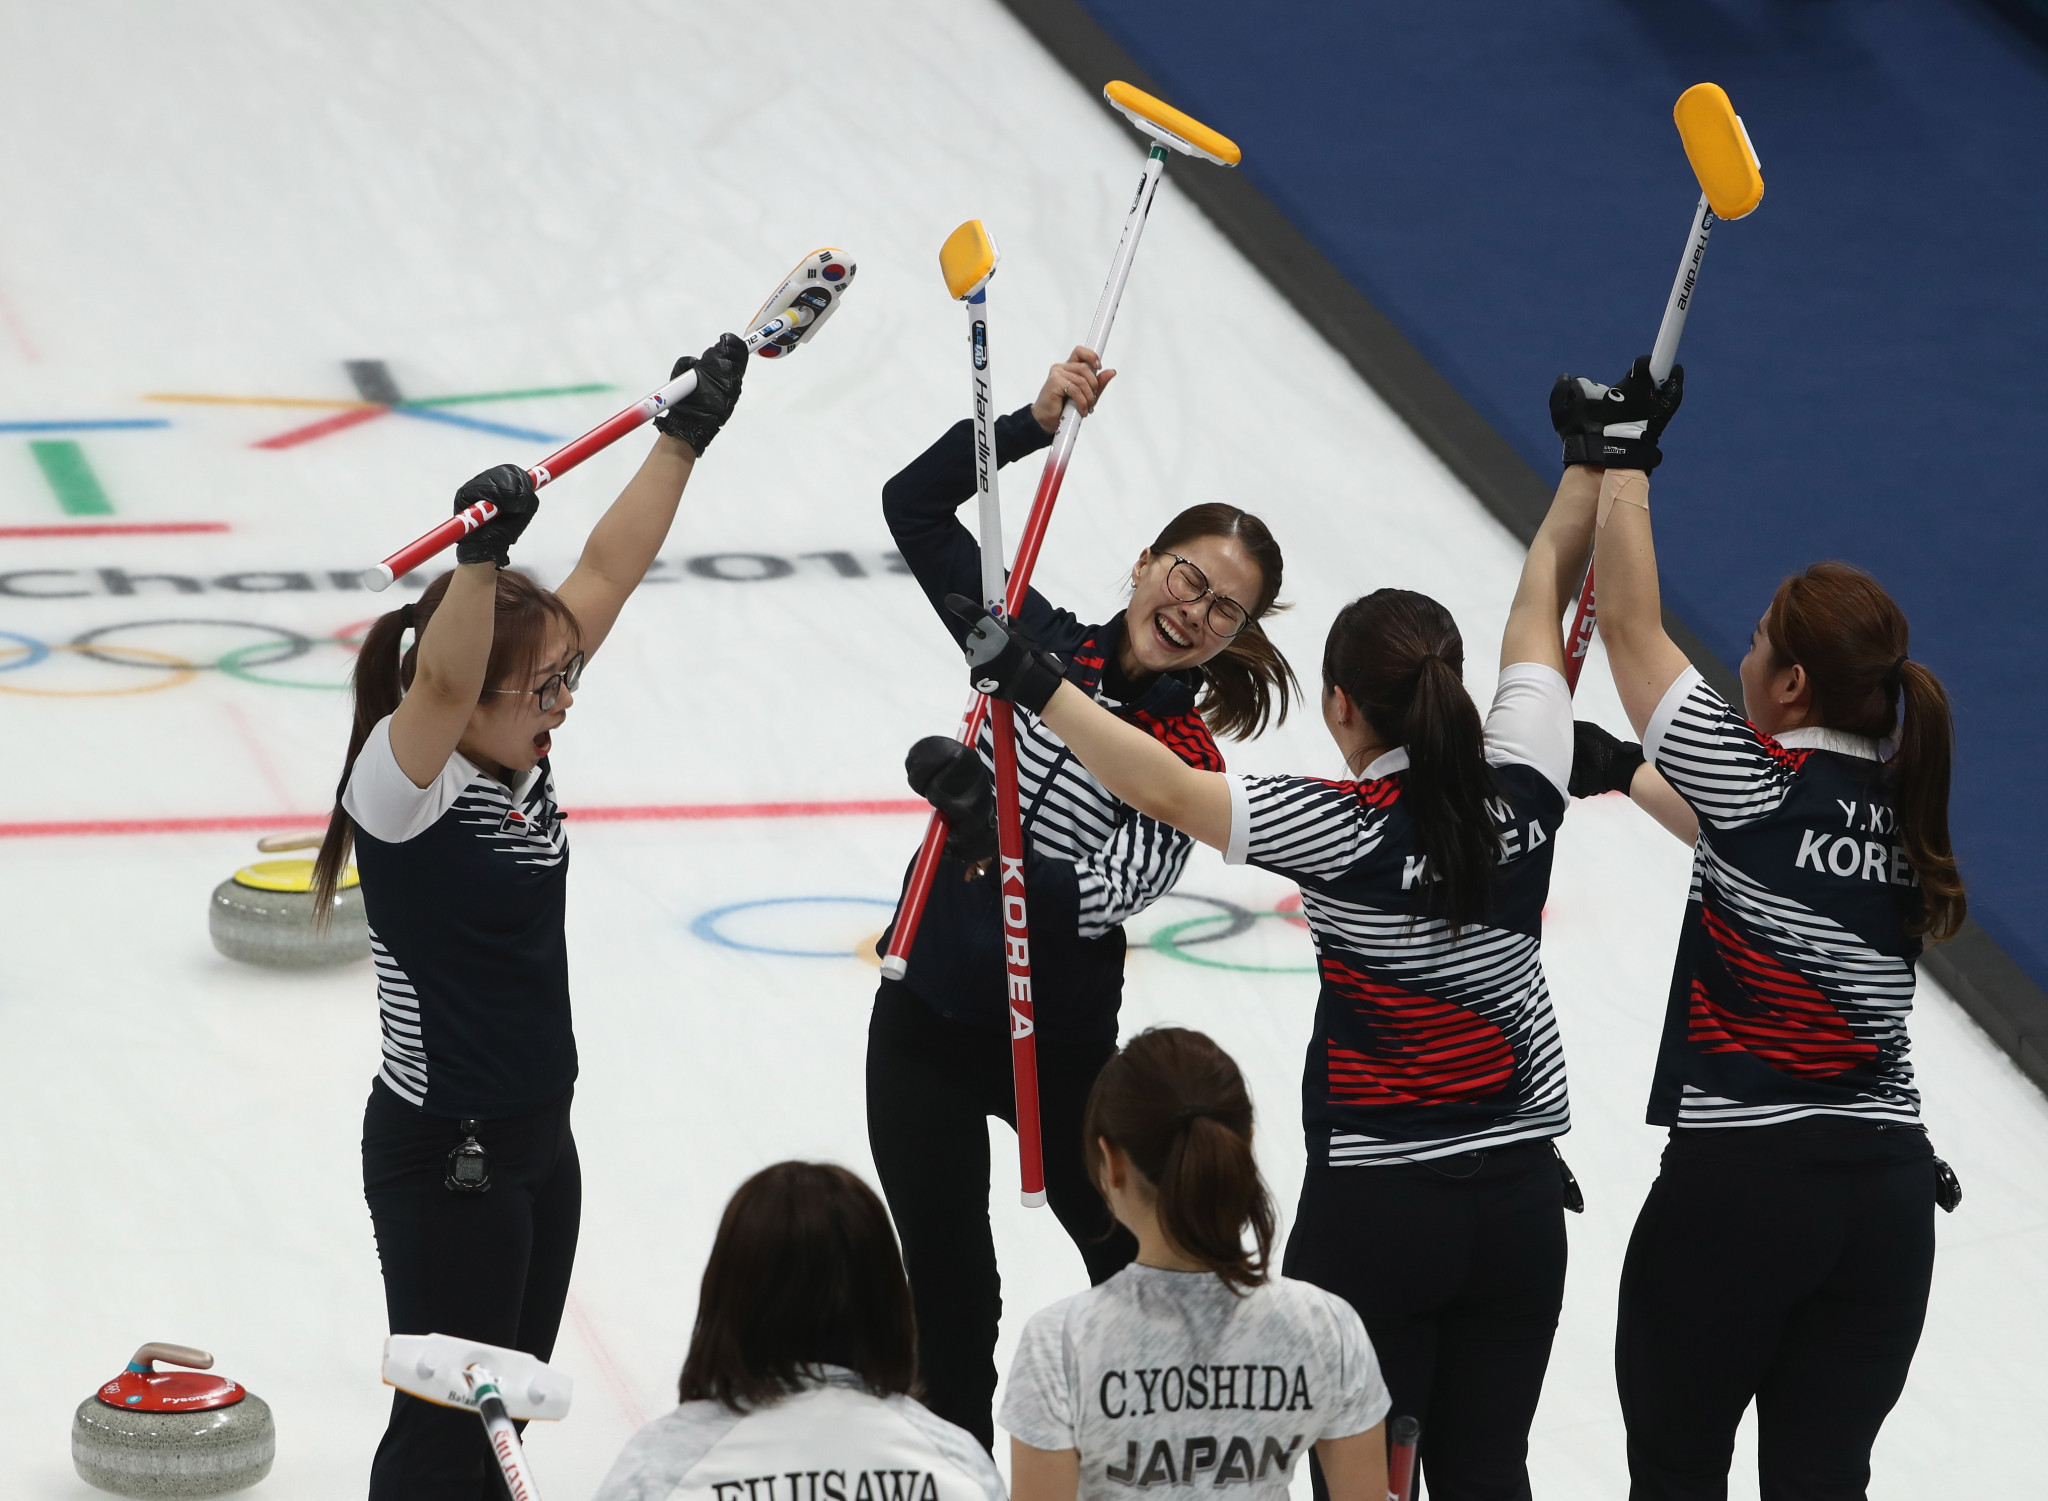 South Korea's Garlic Girls were a hit at the curling ©Getty Images